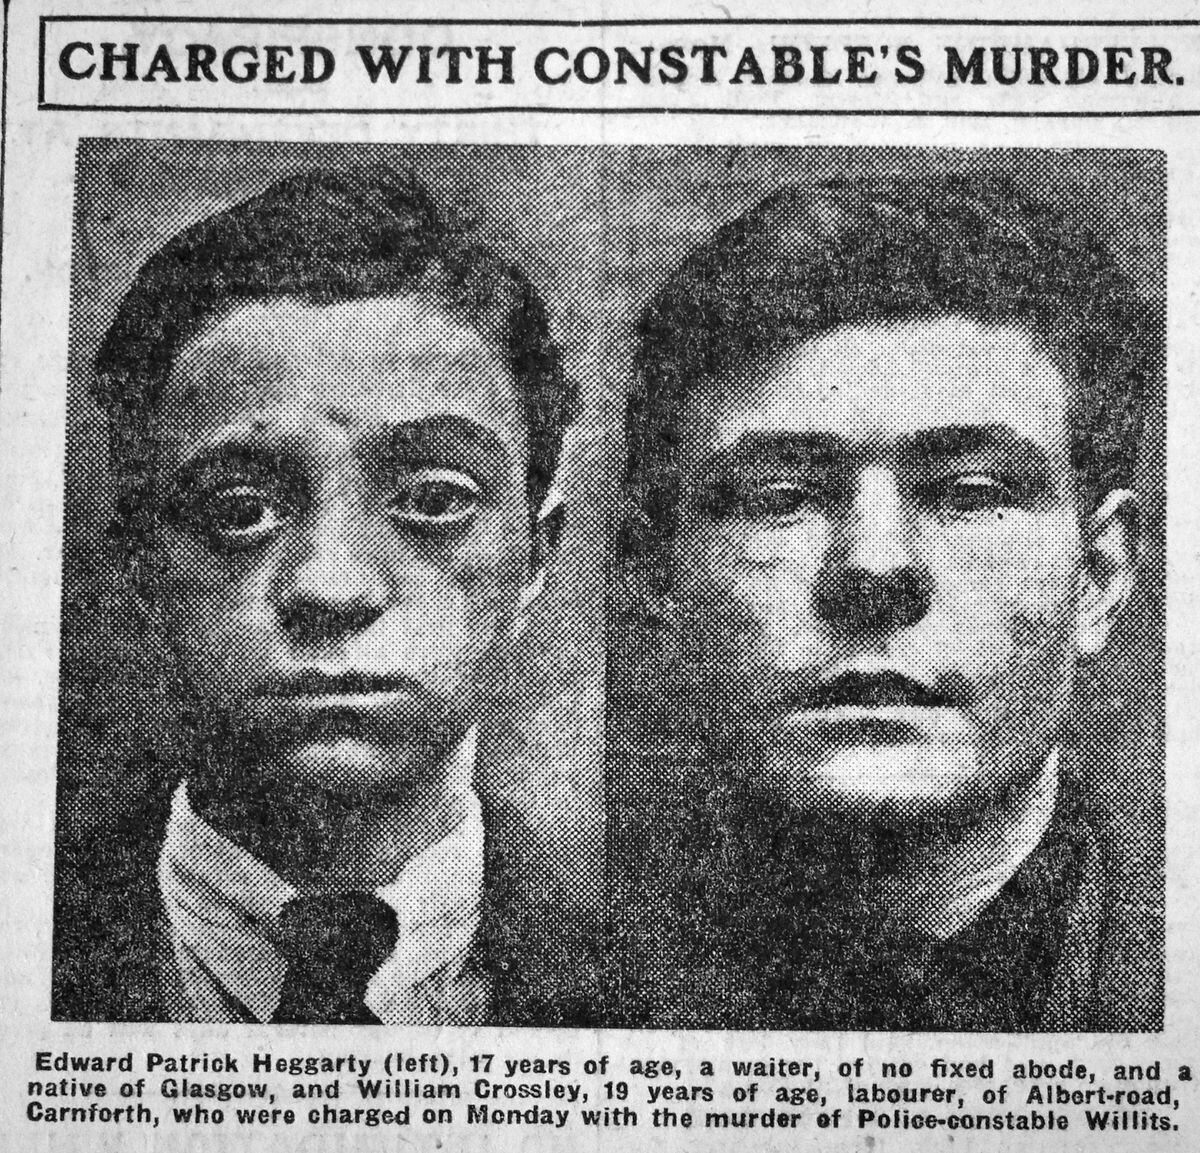 The killers who escaped the gallows – Jock Heggerty, left, and Bill Crossley.